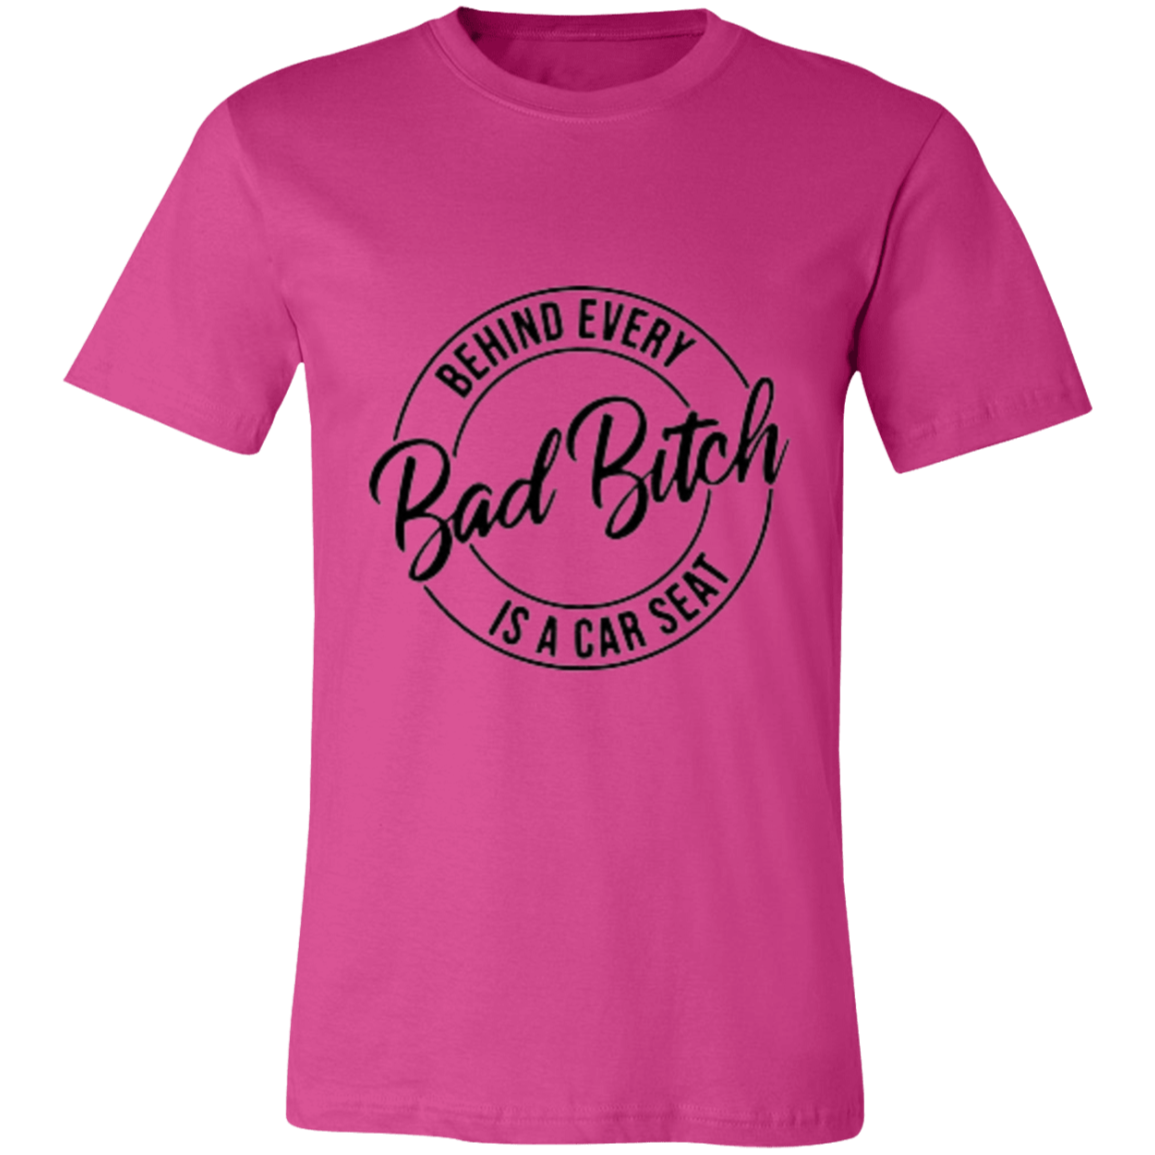 Behind Every Bad Bitch Jersey Short-Sleeve T-Shirt